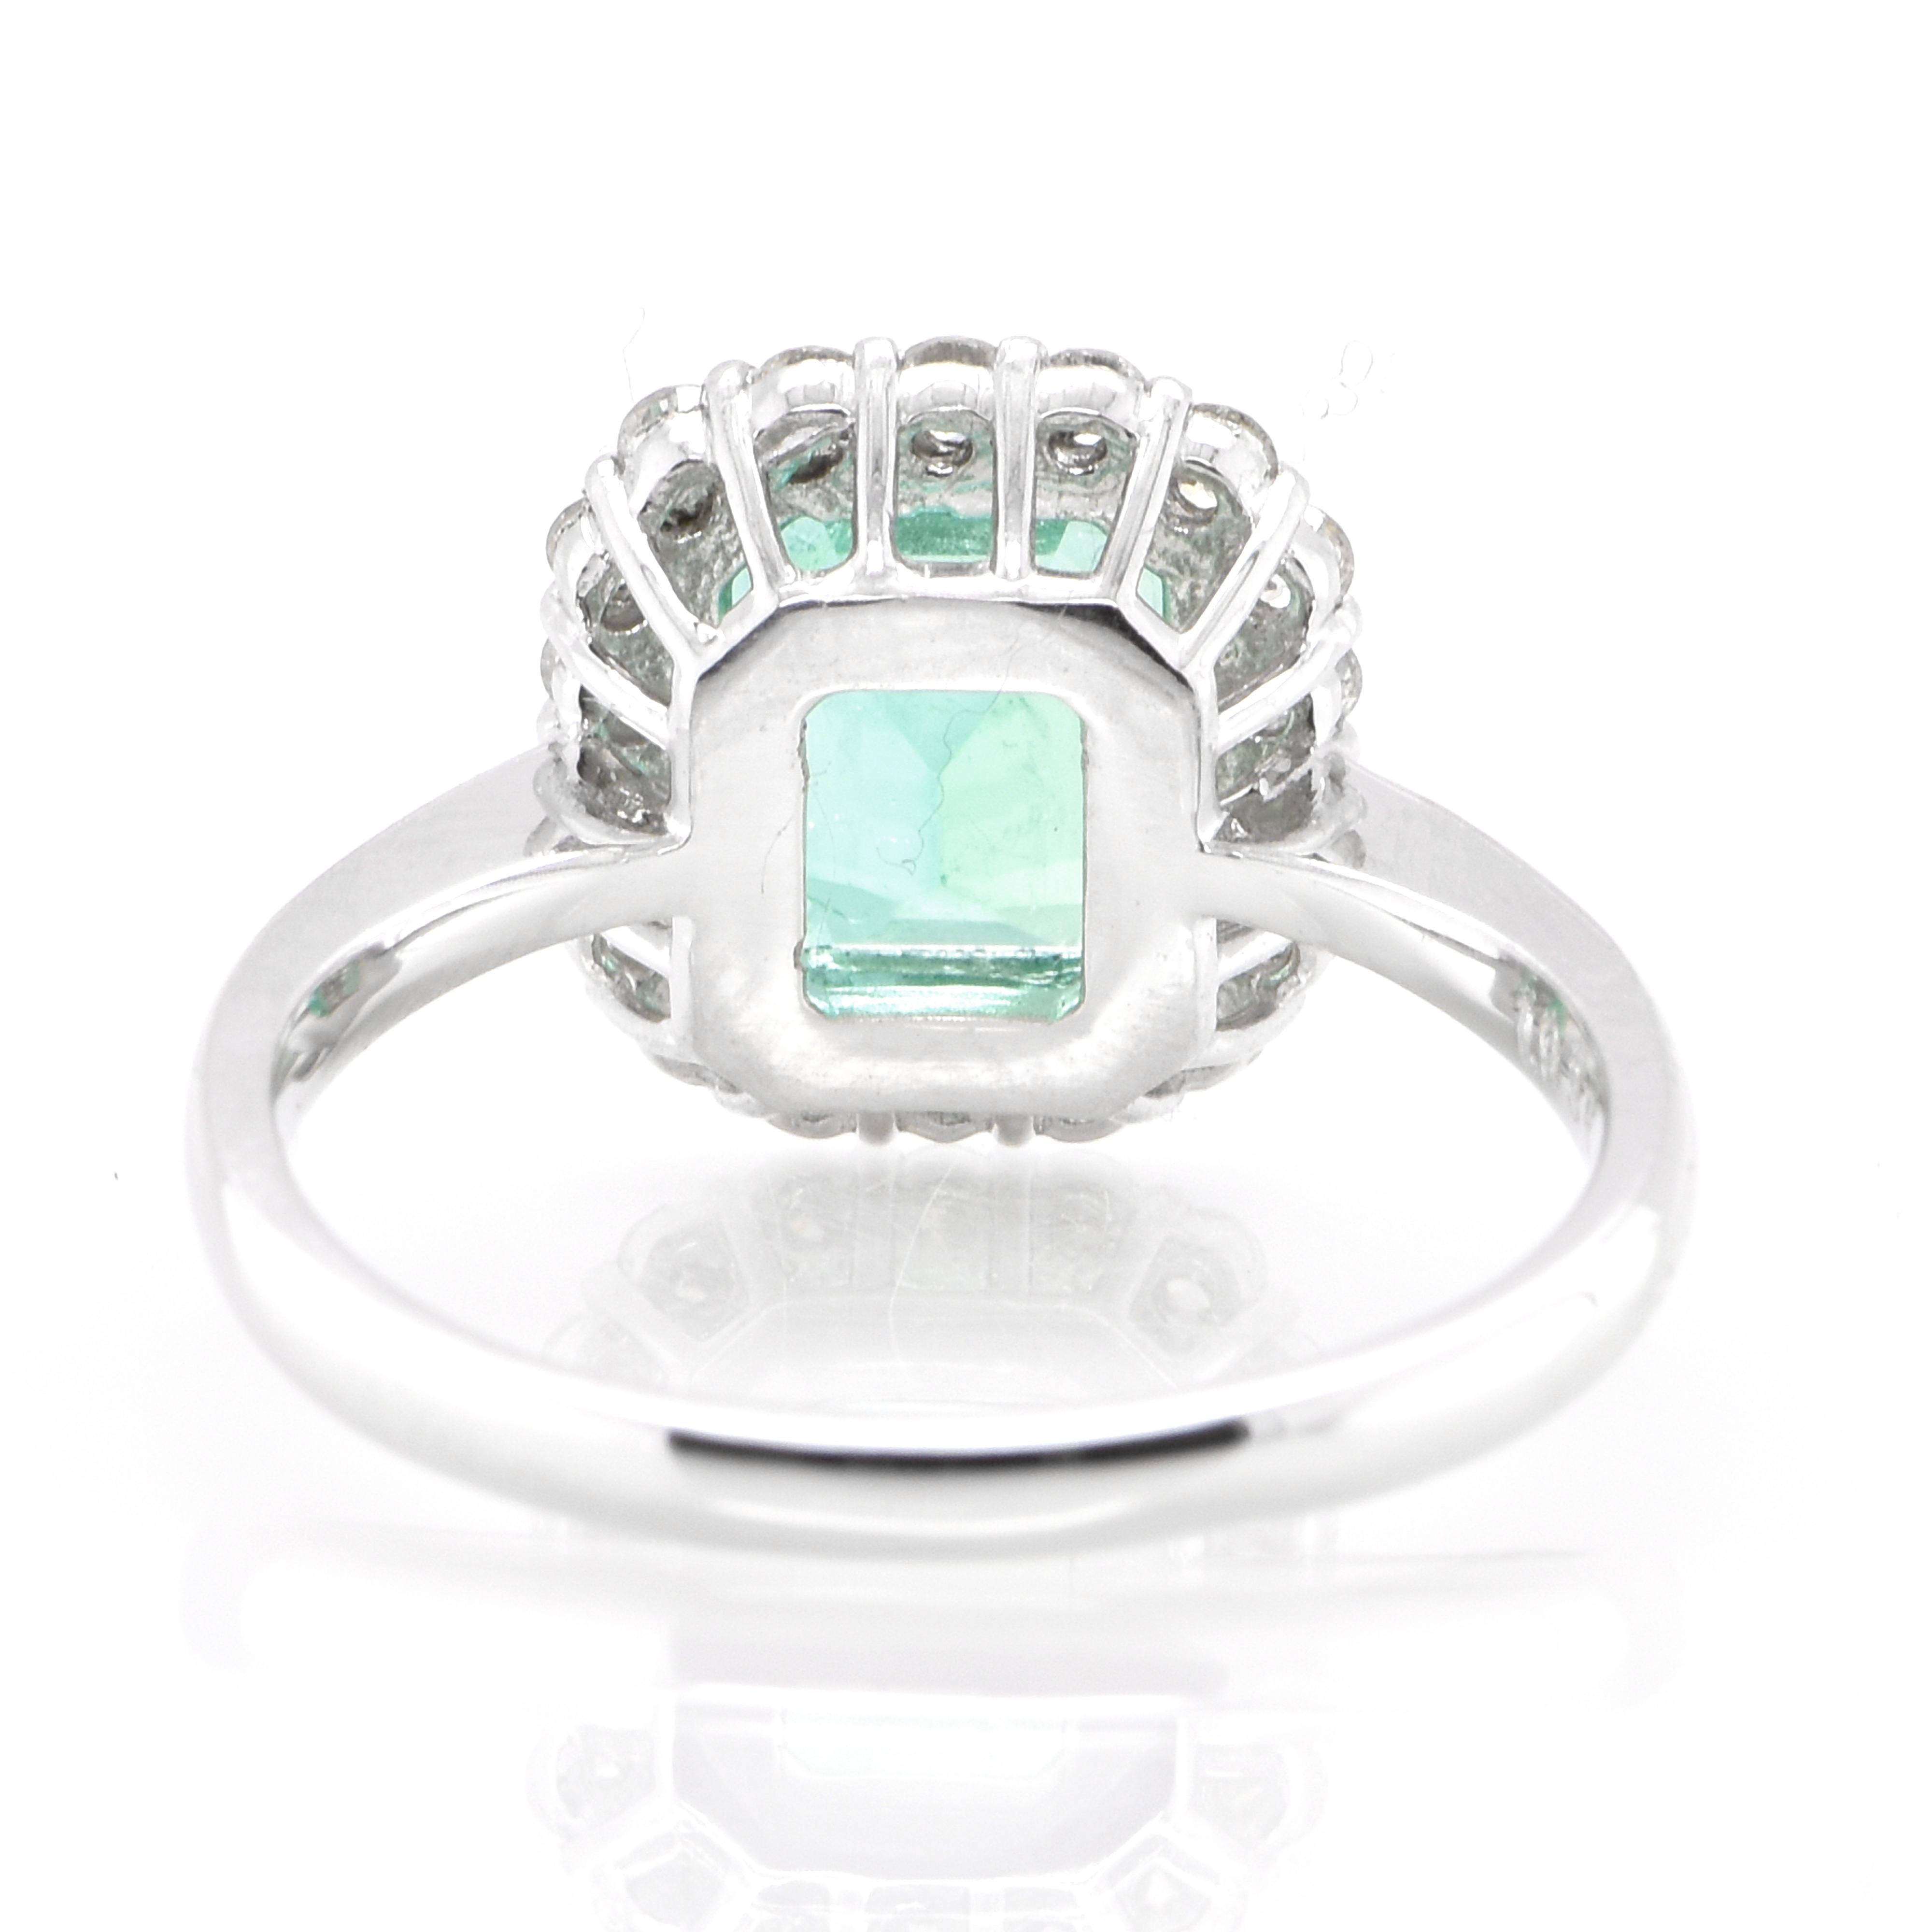 Women's 1.93 Carat Natural Emerald and Diamond Halo Cocktail Ring Set in Platinum